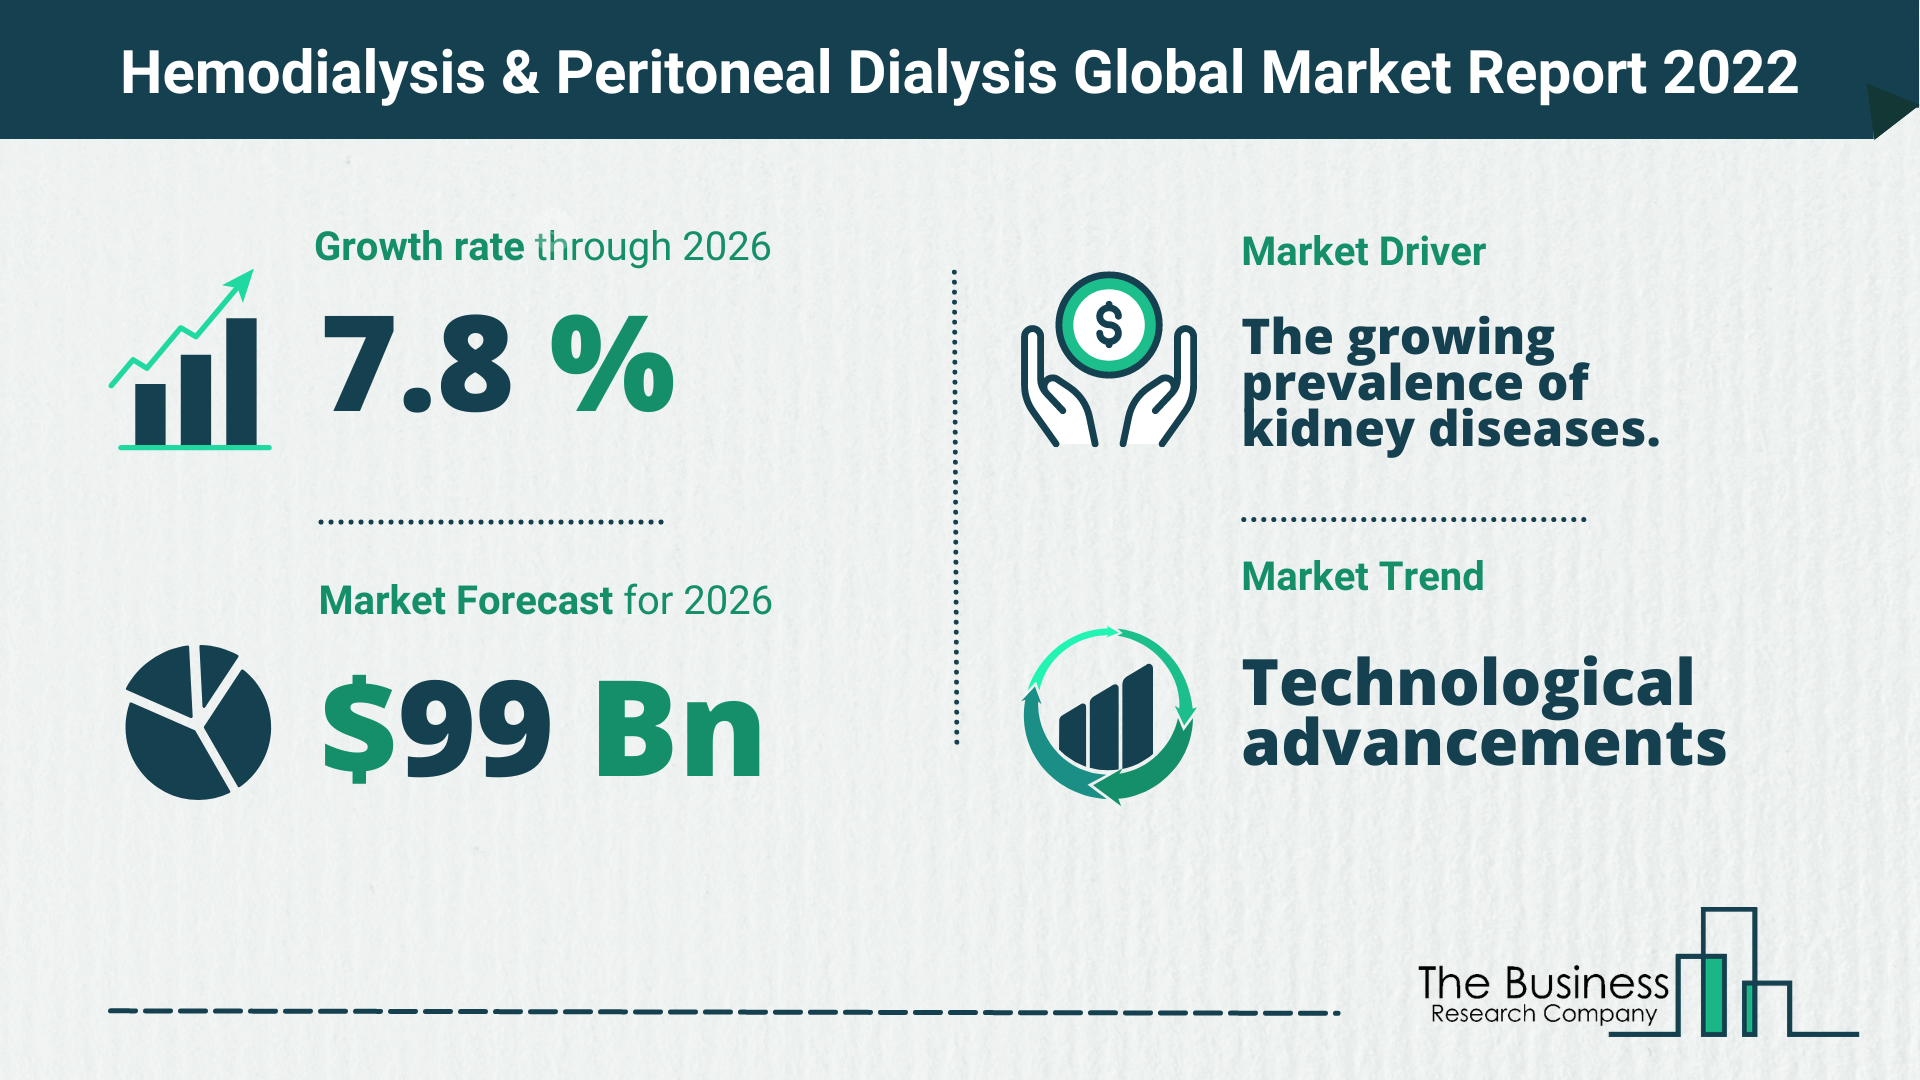 What Is The Hemodialysis And Peritoneal Dialysis Market Overview In 2022?